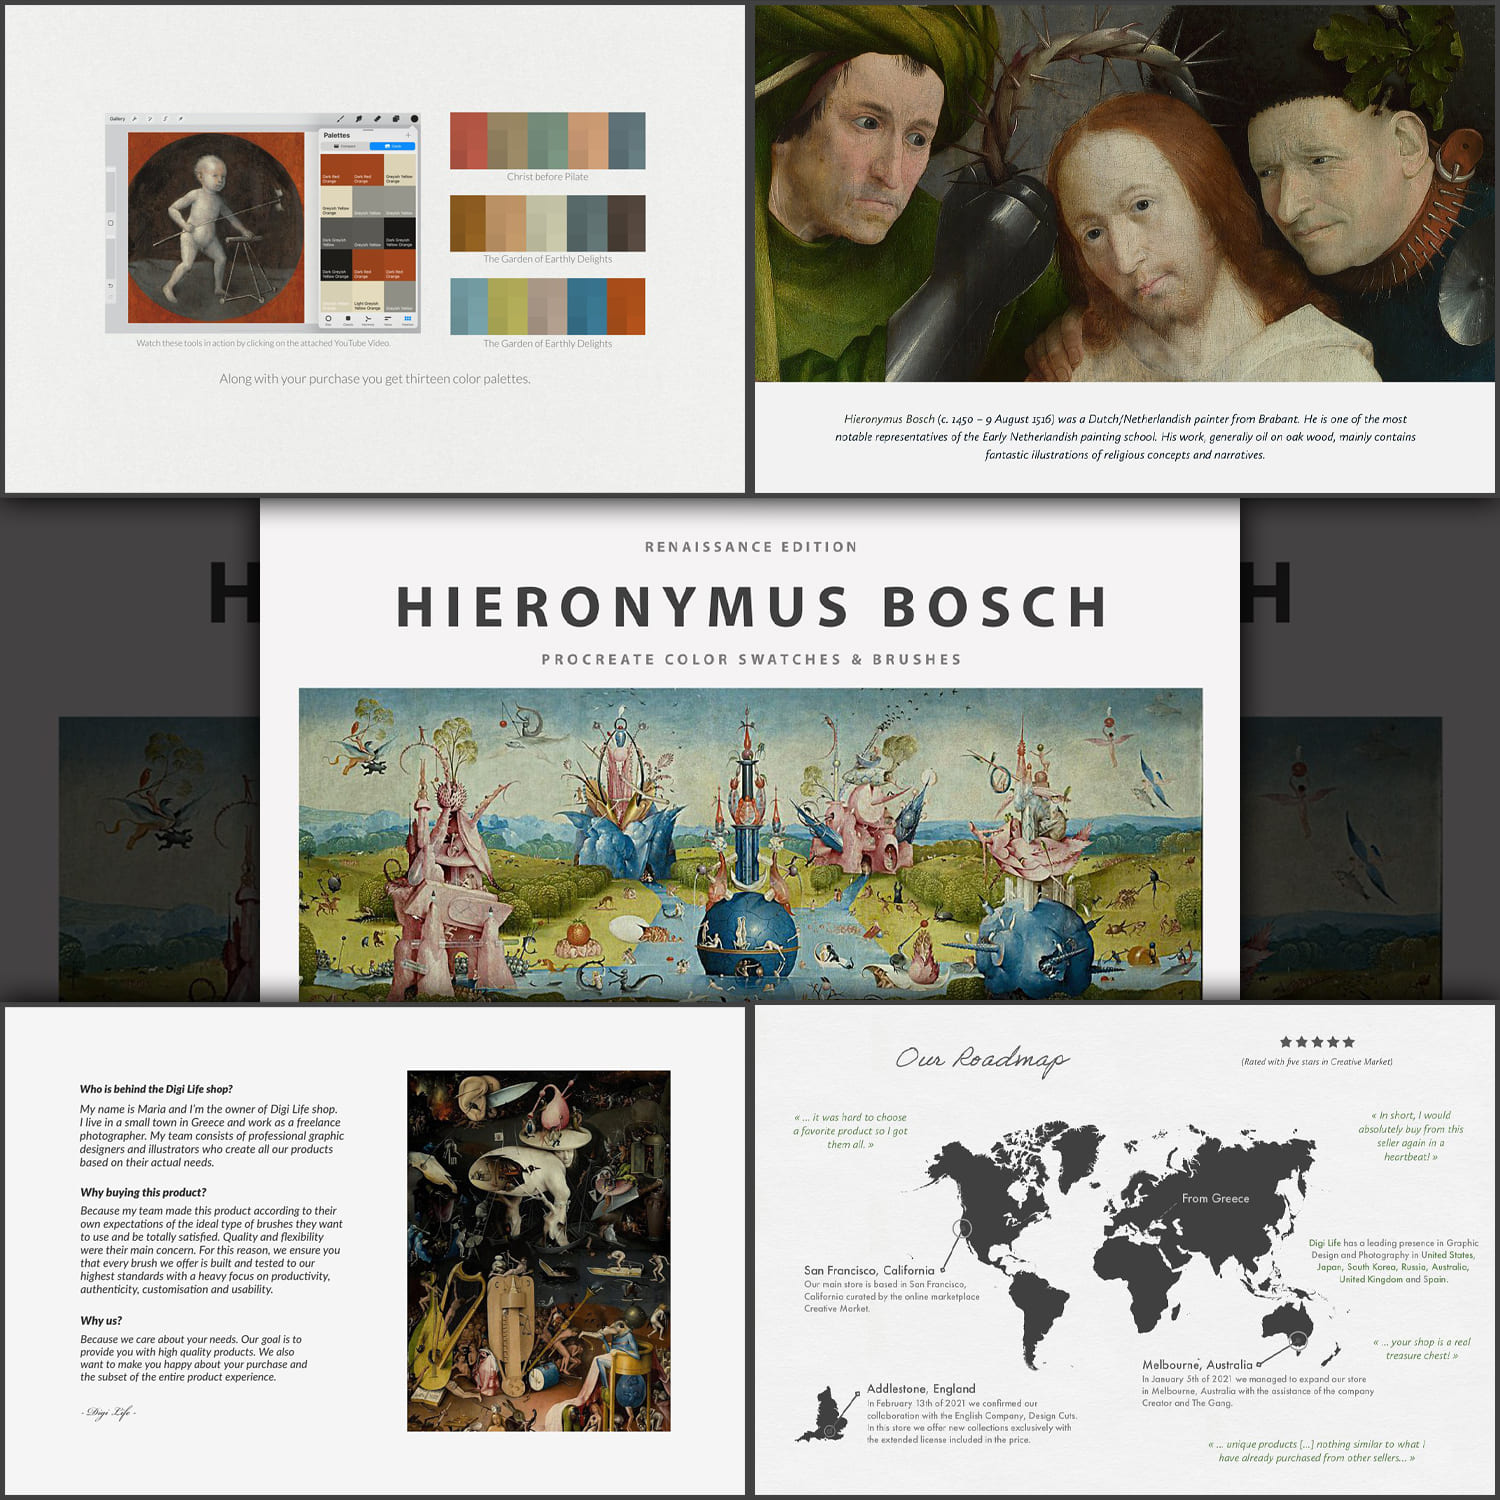 Hieronymus Bosch Procreate Brushes Cover.